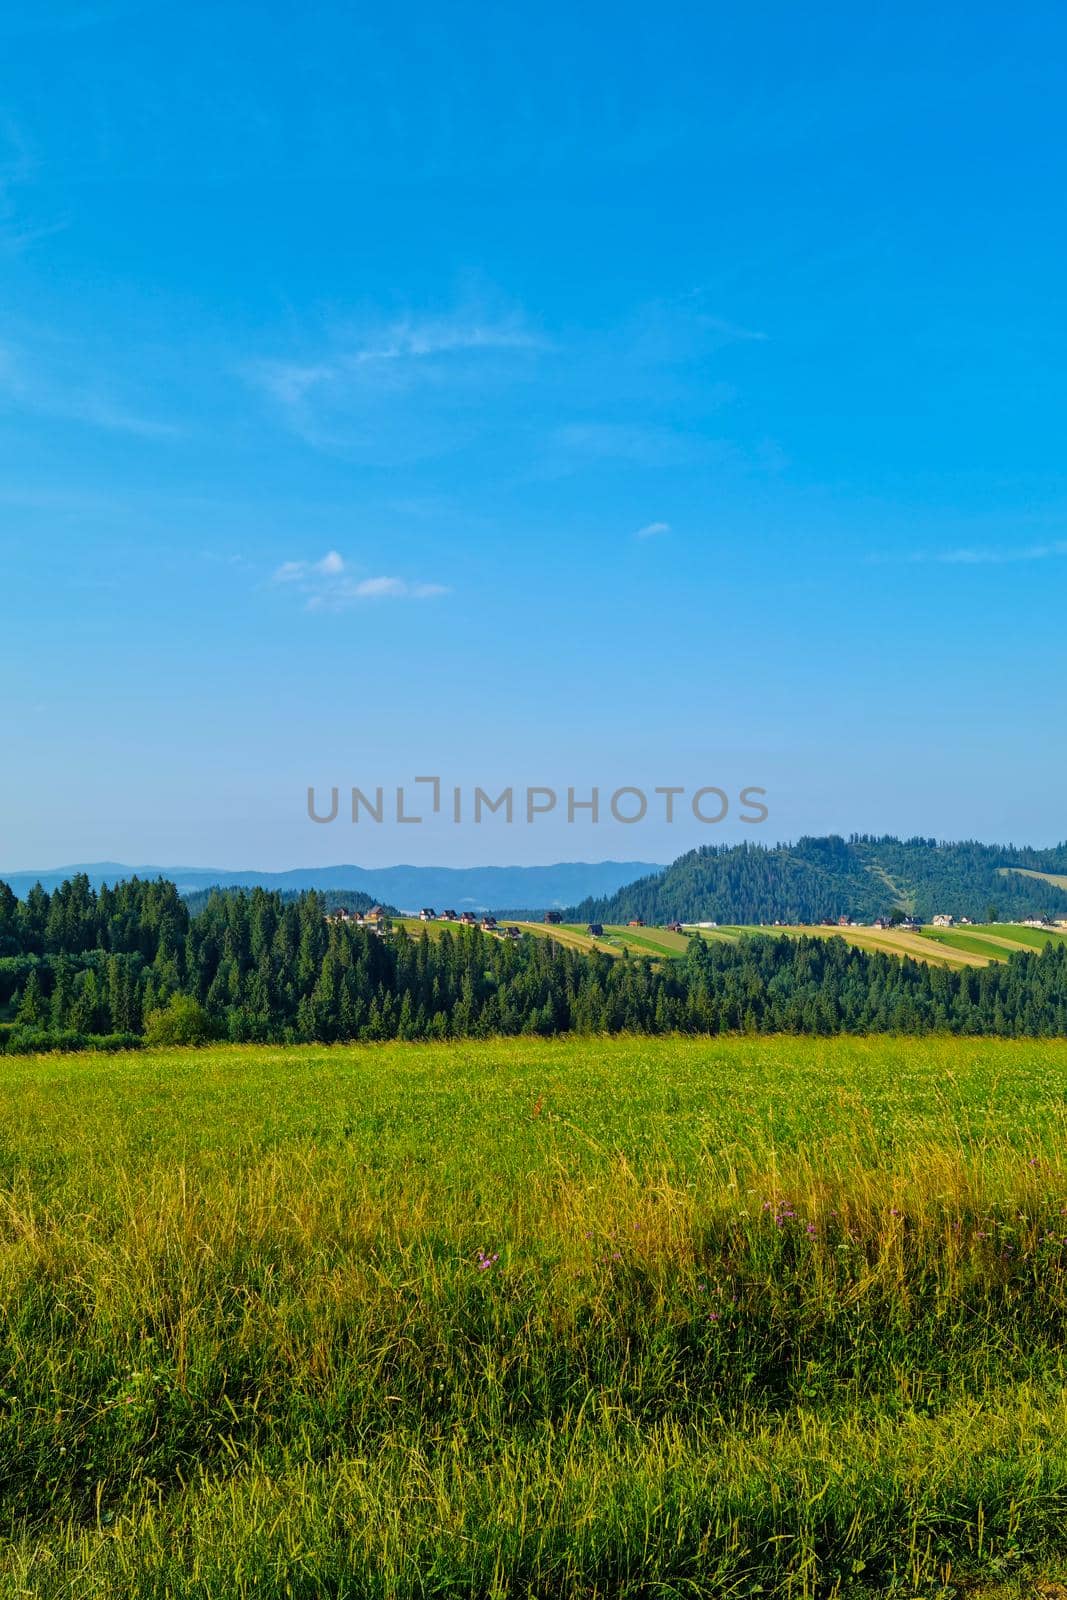 A picturesque view of a green field in a mountainous area in summer